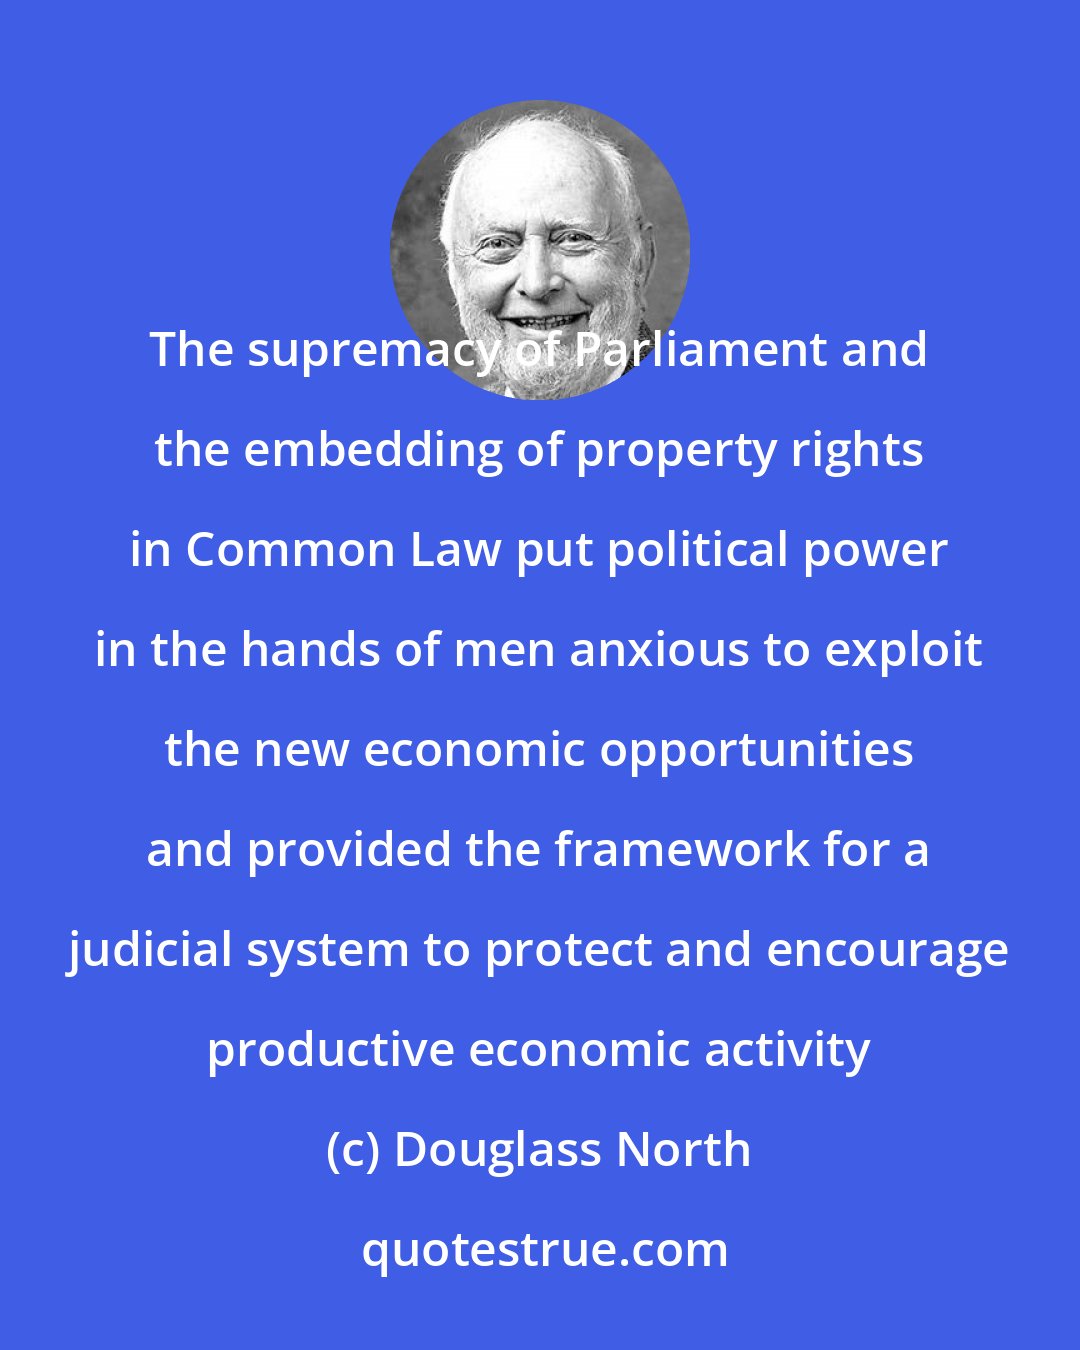 Douglass North: The supremacy of Parliament and the embedding of property rights in Common Law put political power in the hands of men anxious to exploit the new economic opportunities and provided the framework for a judicial system to protect and encourage productive economic activity